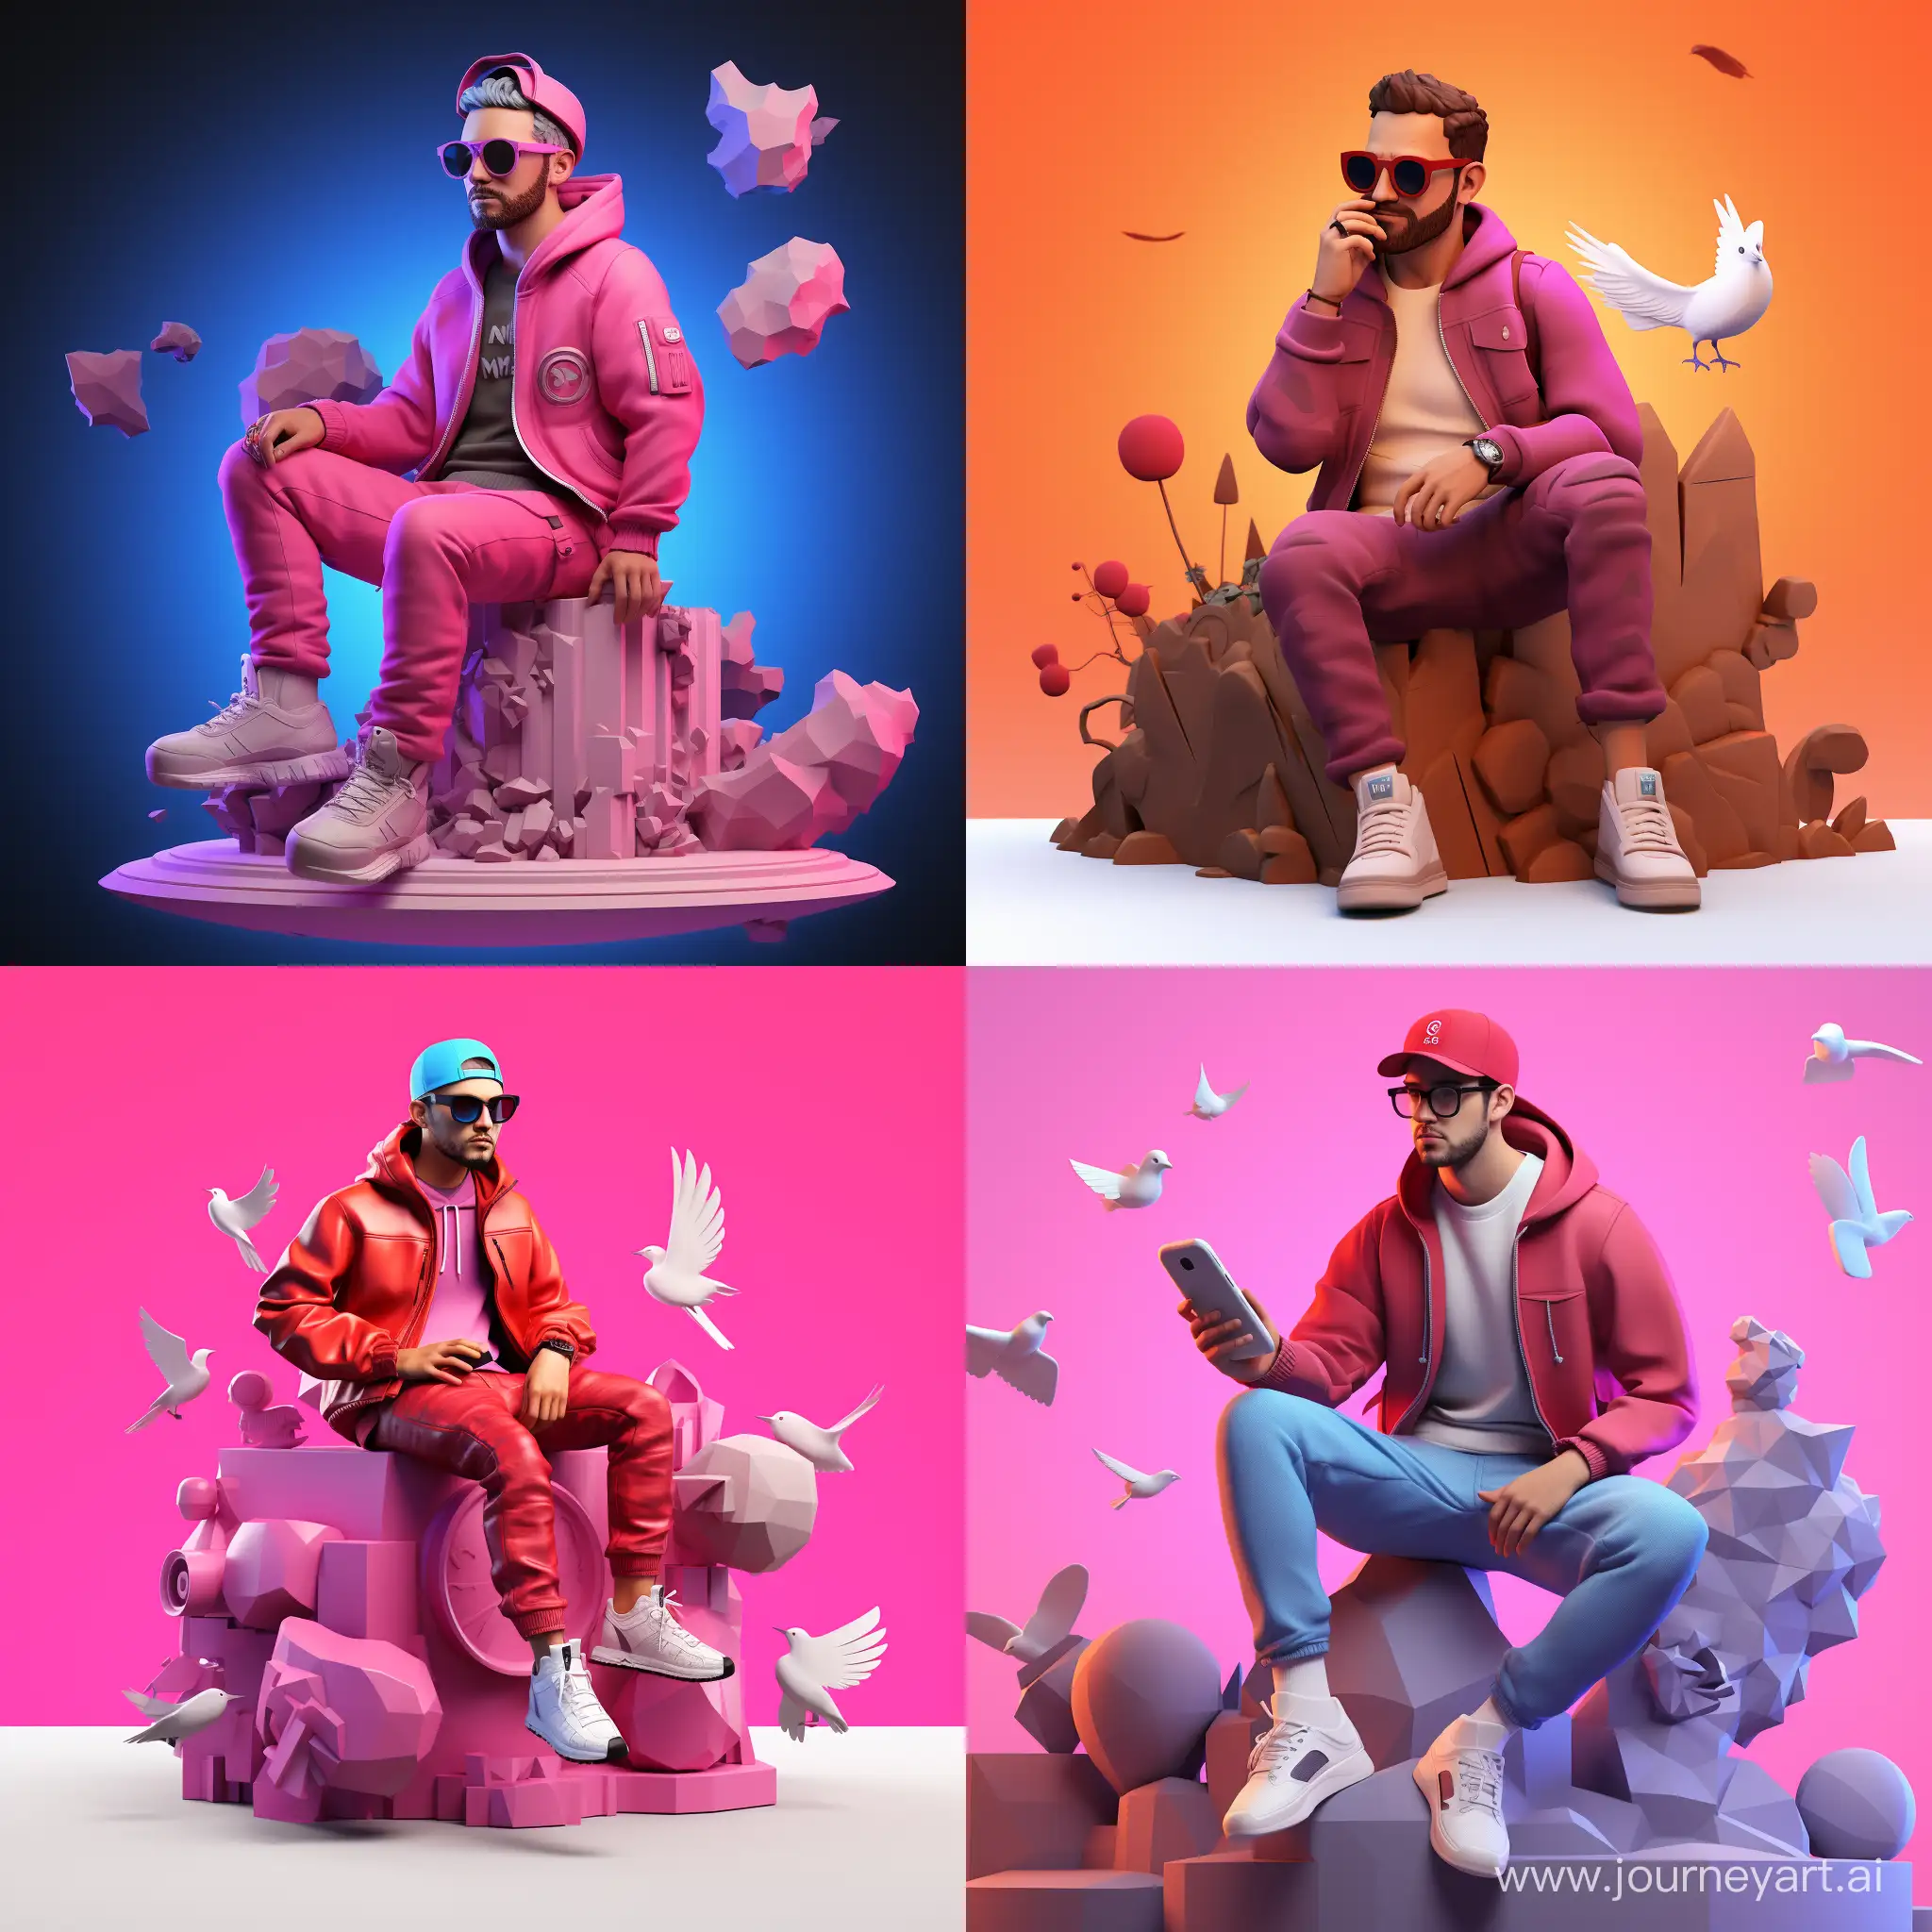 create a 3D illustration of an animated character sitting casually on top of a social media logo "Instagram". The character must wear casual modern clothing such as jeans jacket and sneakers shoes. The background of the image is a social media profile page with a user name "NIZOMIDDIN" and a profile picture that match.